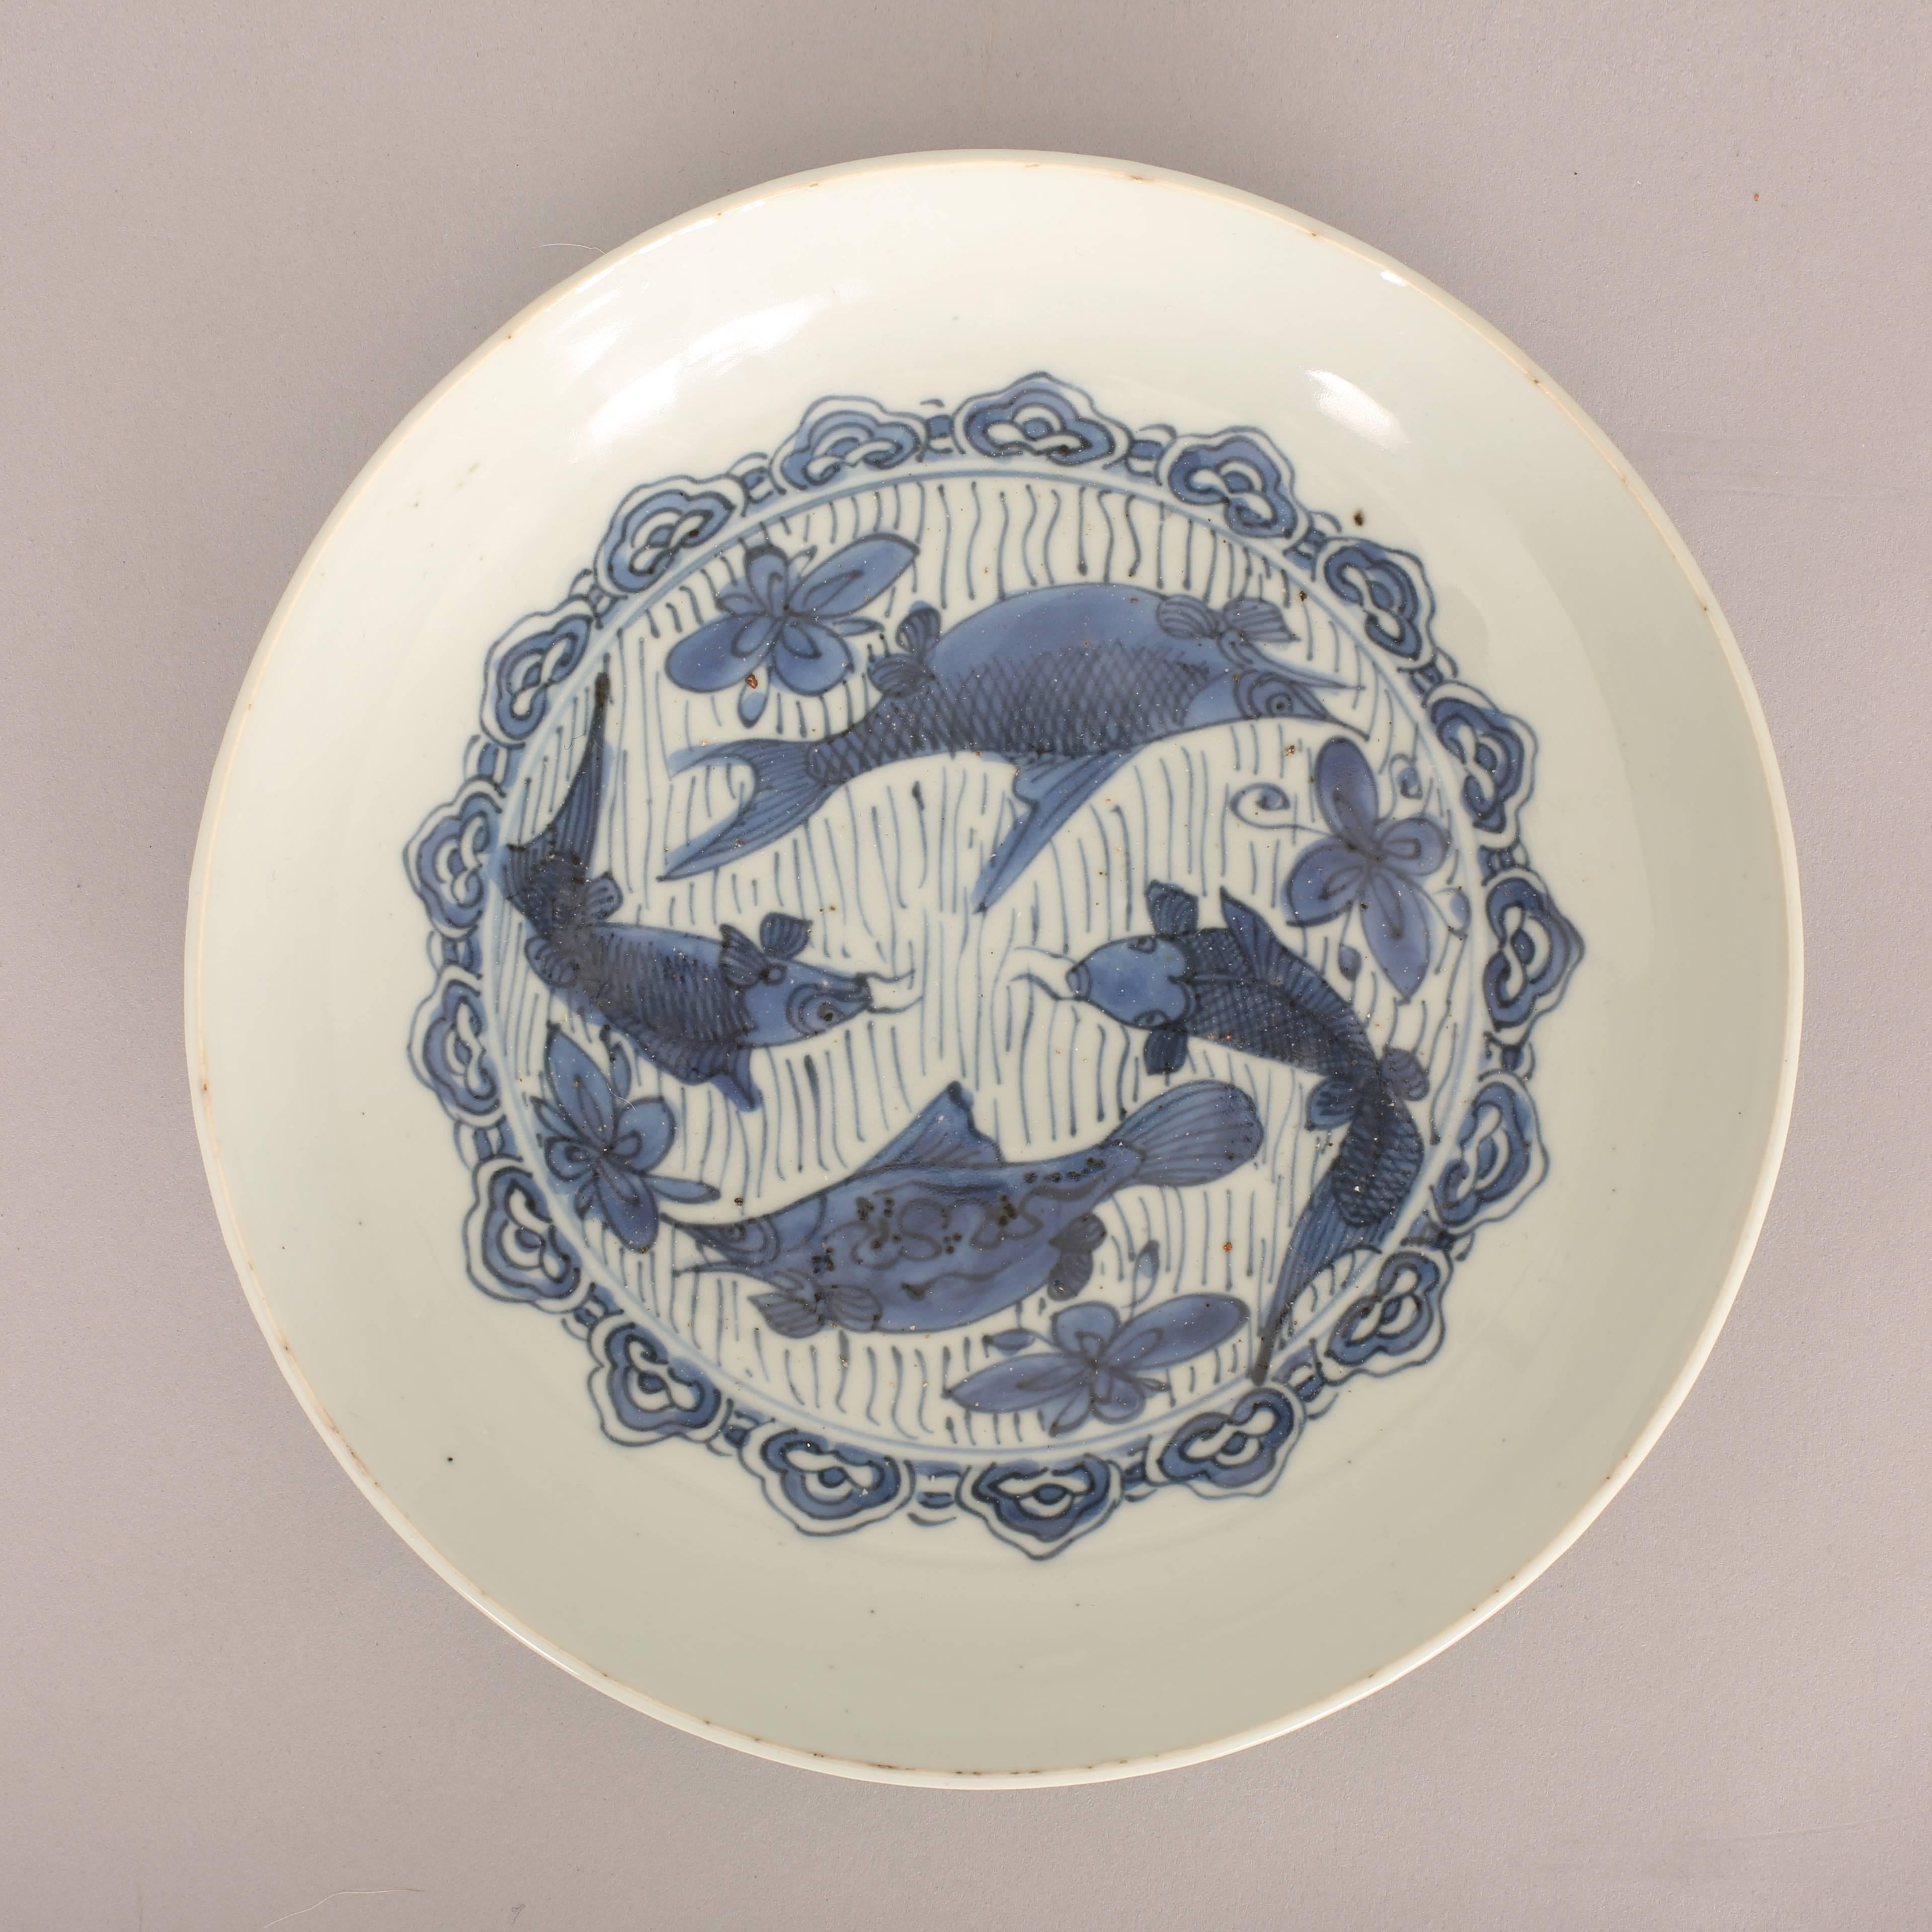 A Chinese export porcelain blue and white saucer dish painted with two perch (mandarin fish) and two carp in water surrounded by aquatic flowers, the medallion surrounded by a continuous decorative ruyi-head border,

Wanli, 1573-1619.

Diameter